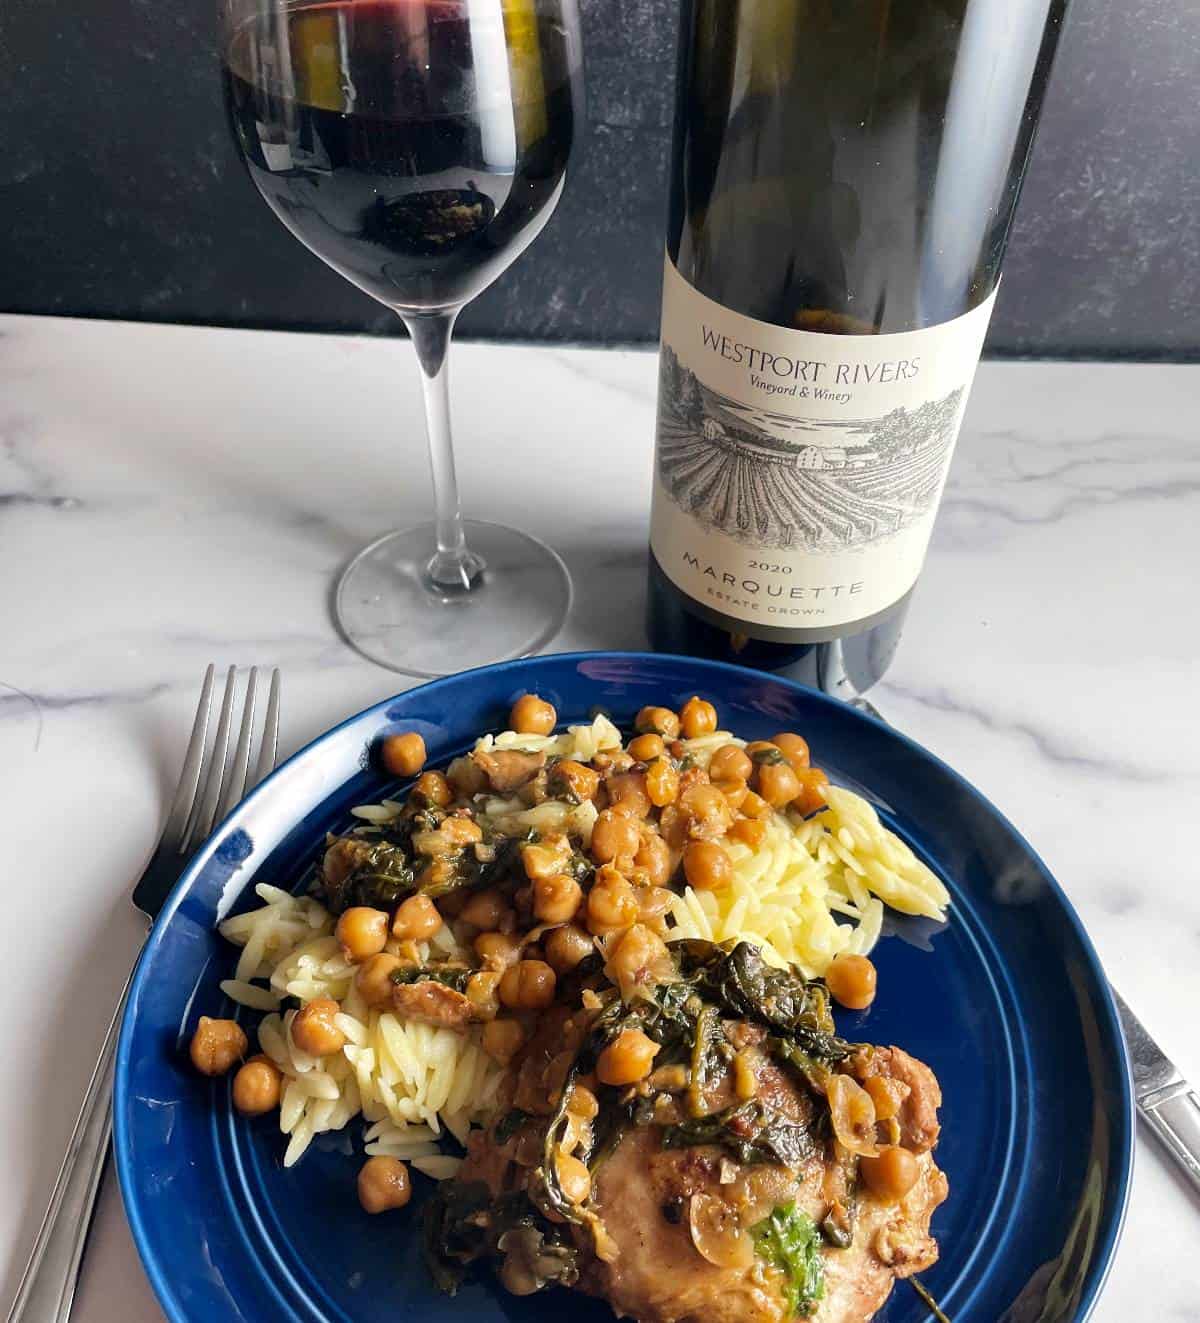 Marquette red wine served with a plate of Moroccan chicken with chickpeas and orzo.